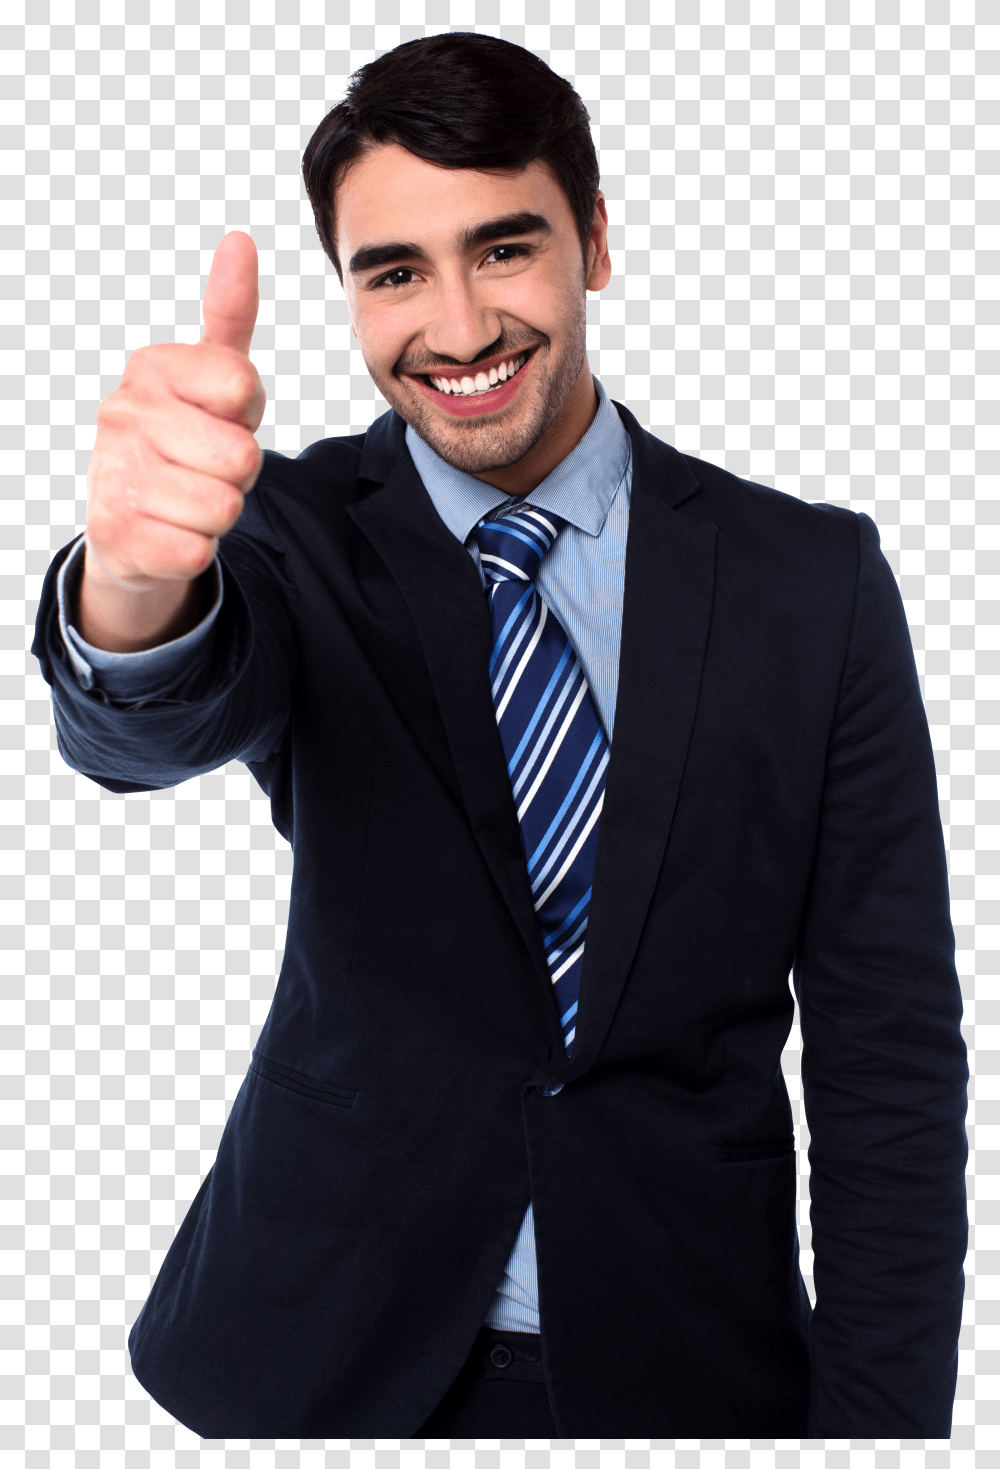 Men Pointing Thumbs Up Image Thumbs Up Guy Transparent Png